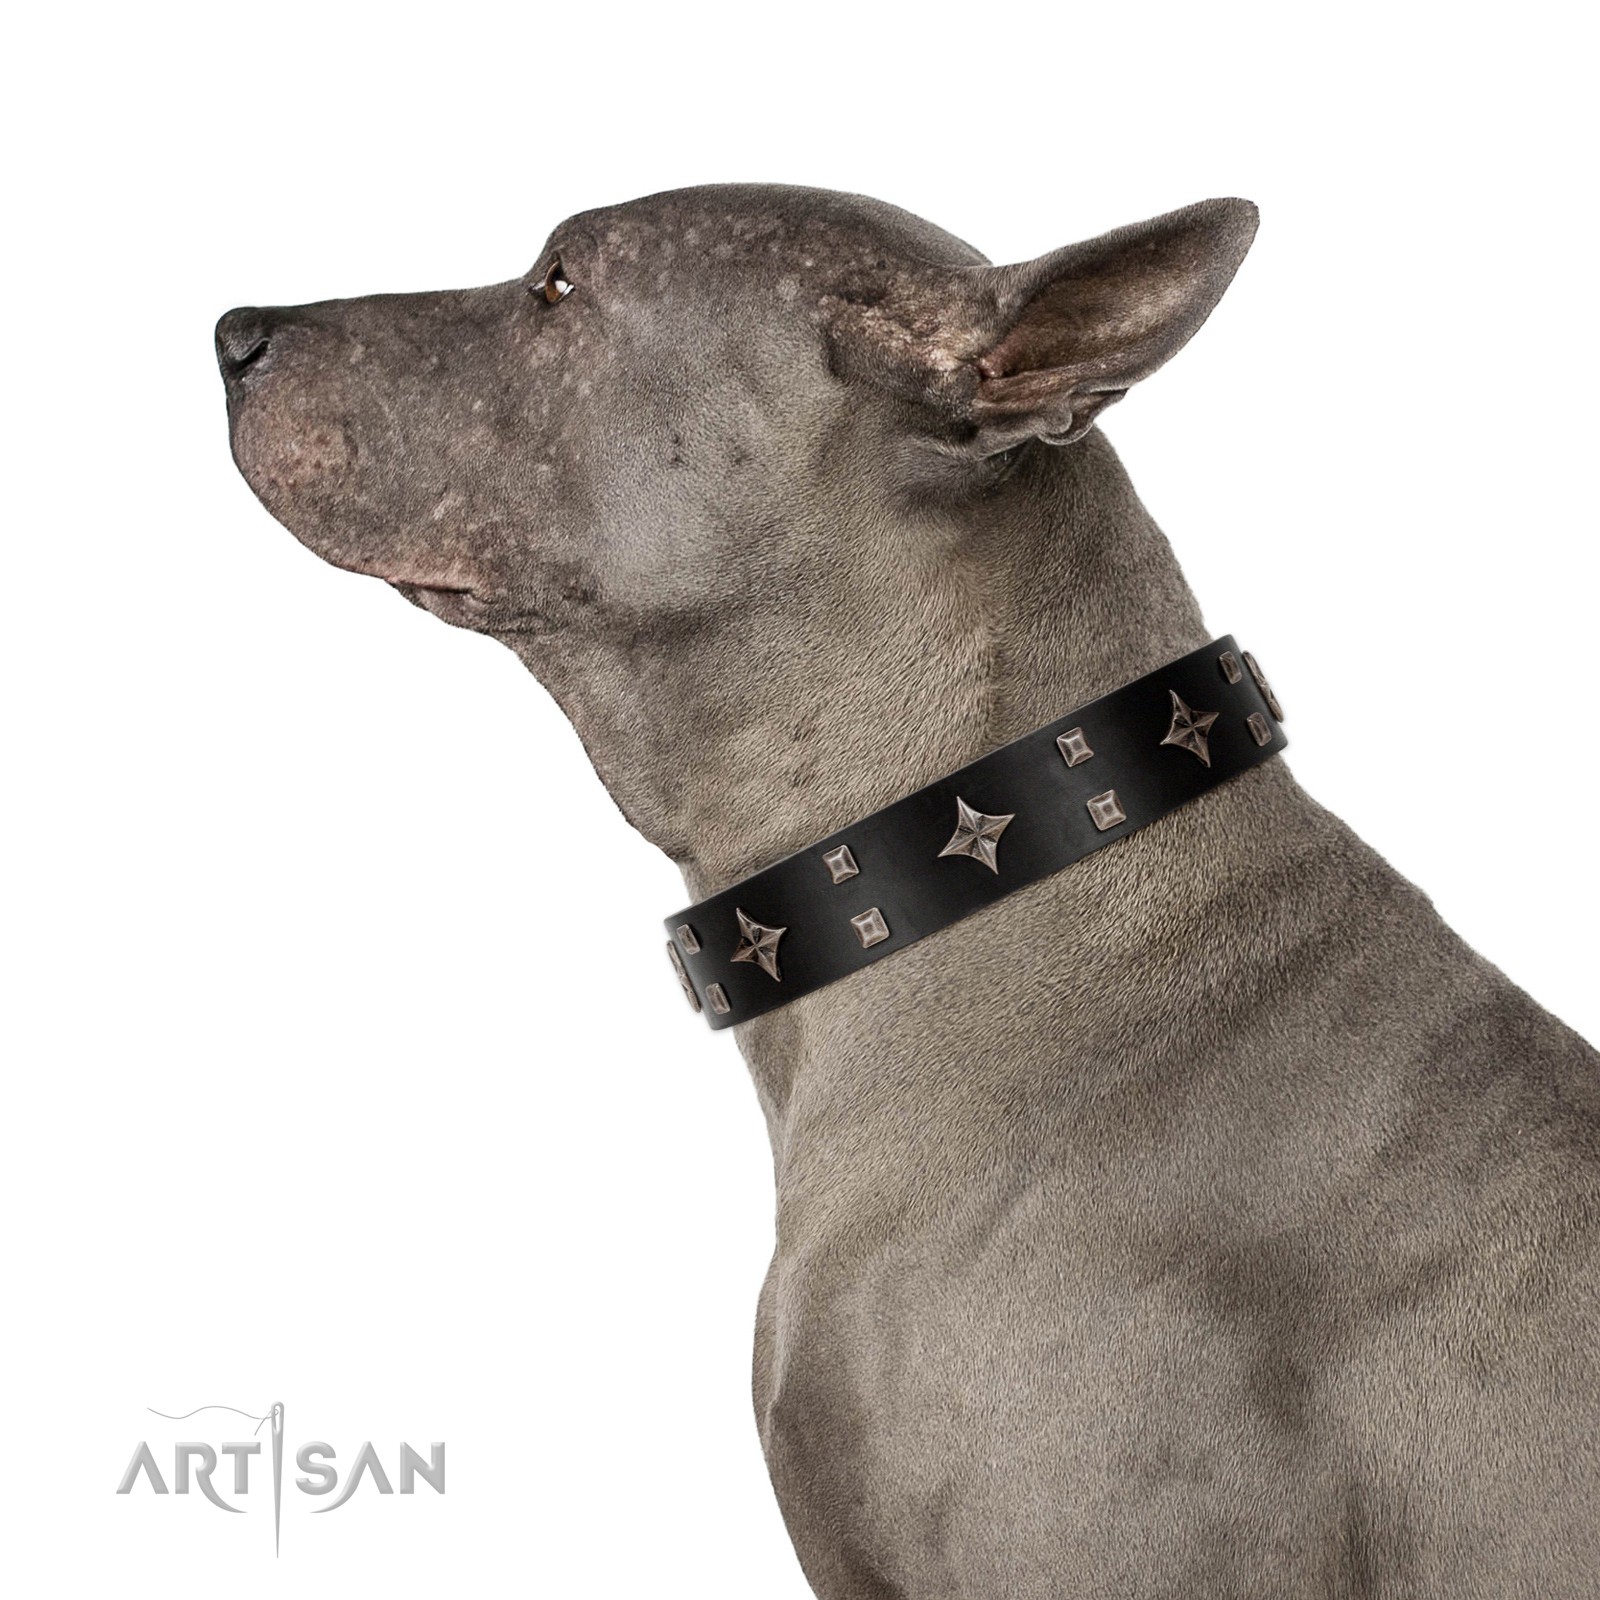 Snappy Dresser Fdt Artisan Black Leather Dog Collar Adorned With